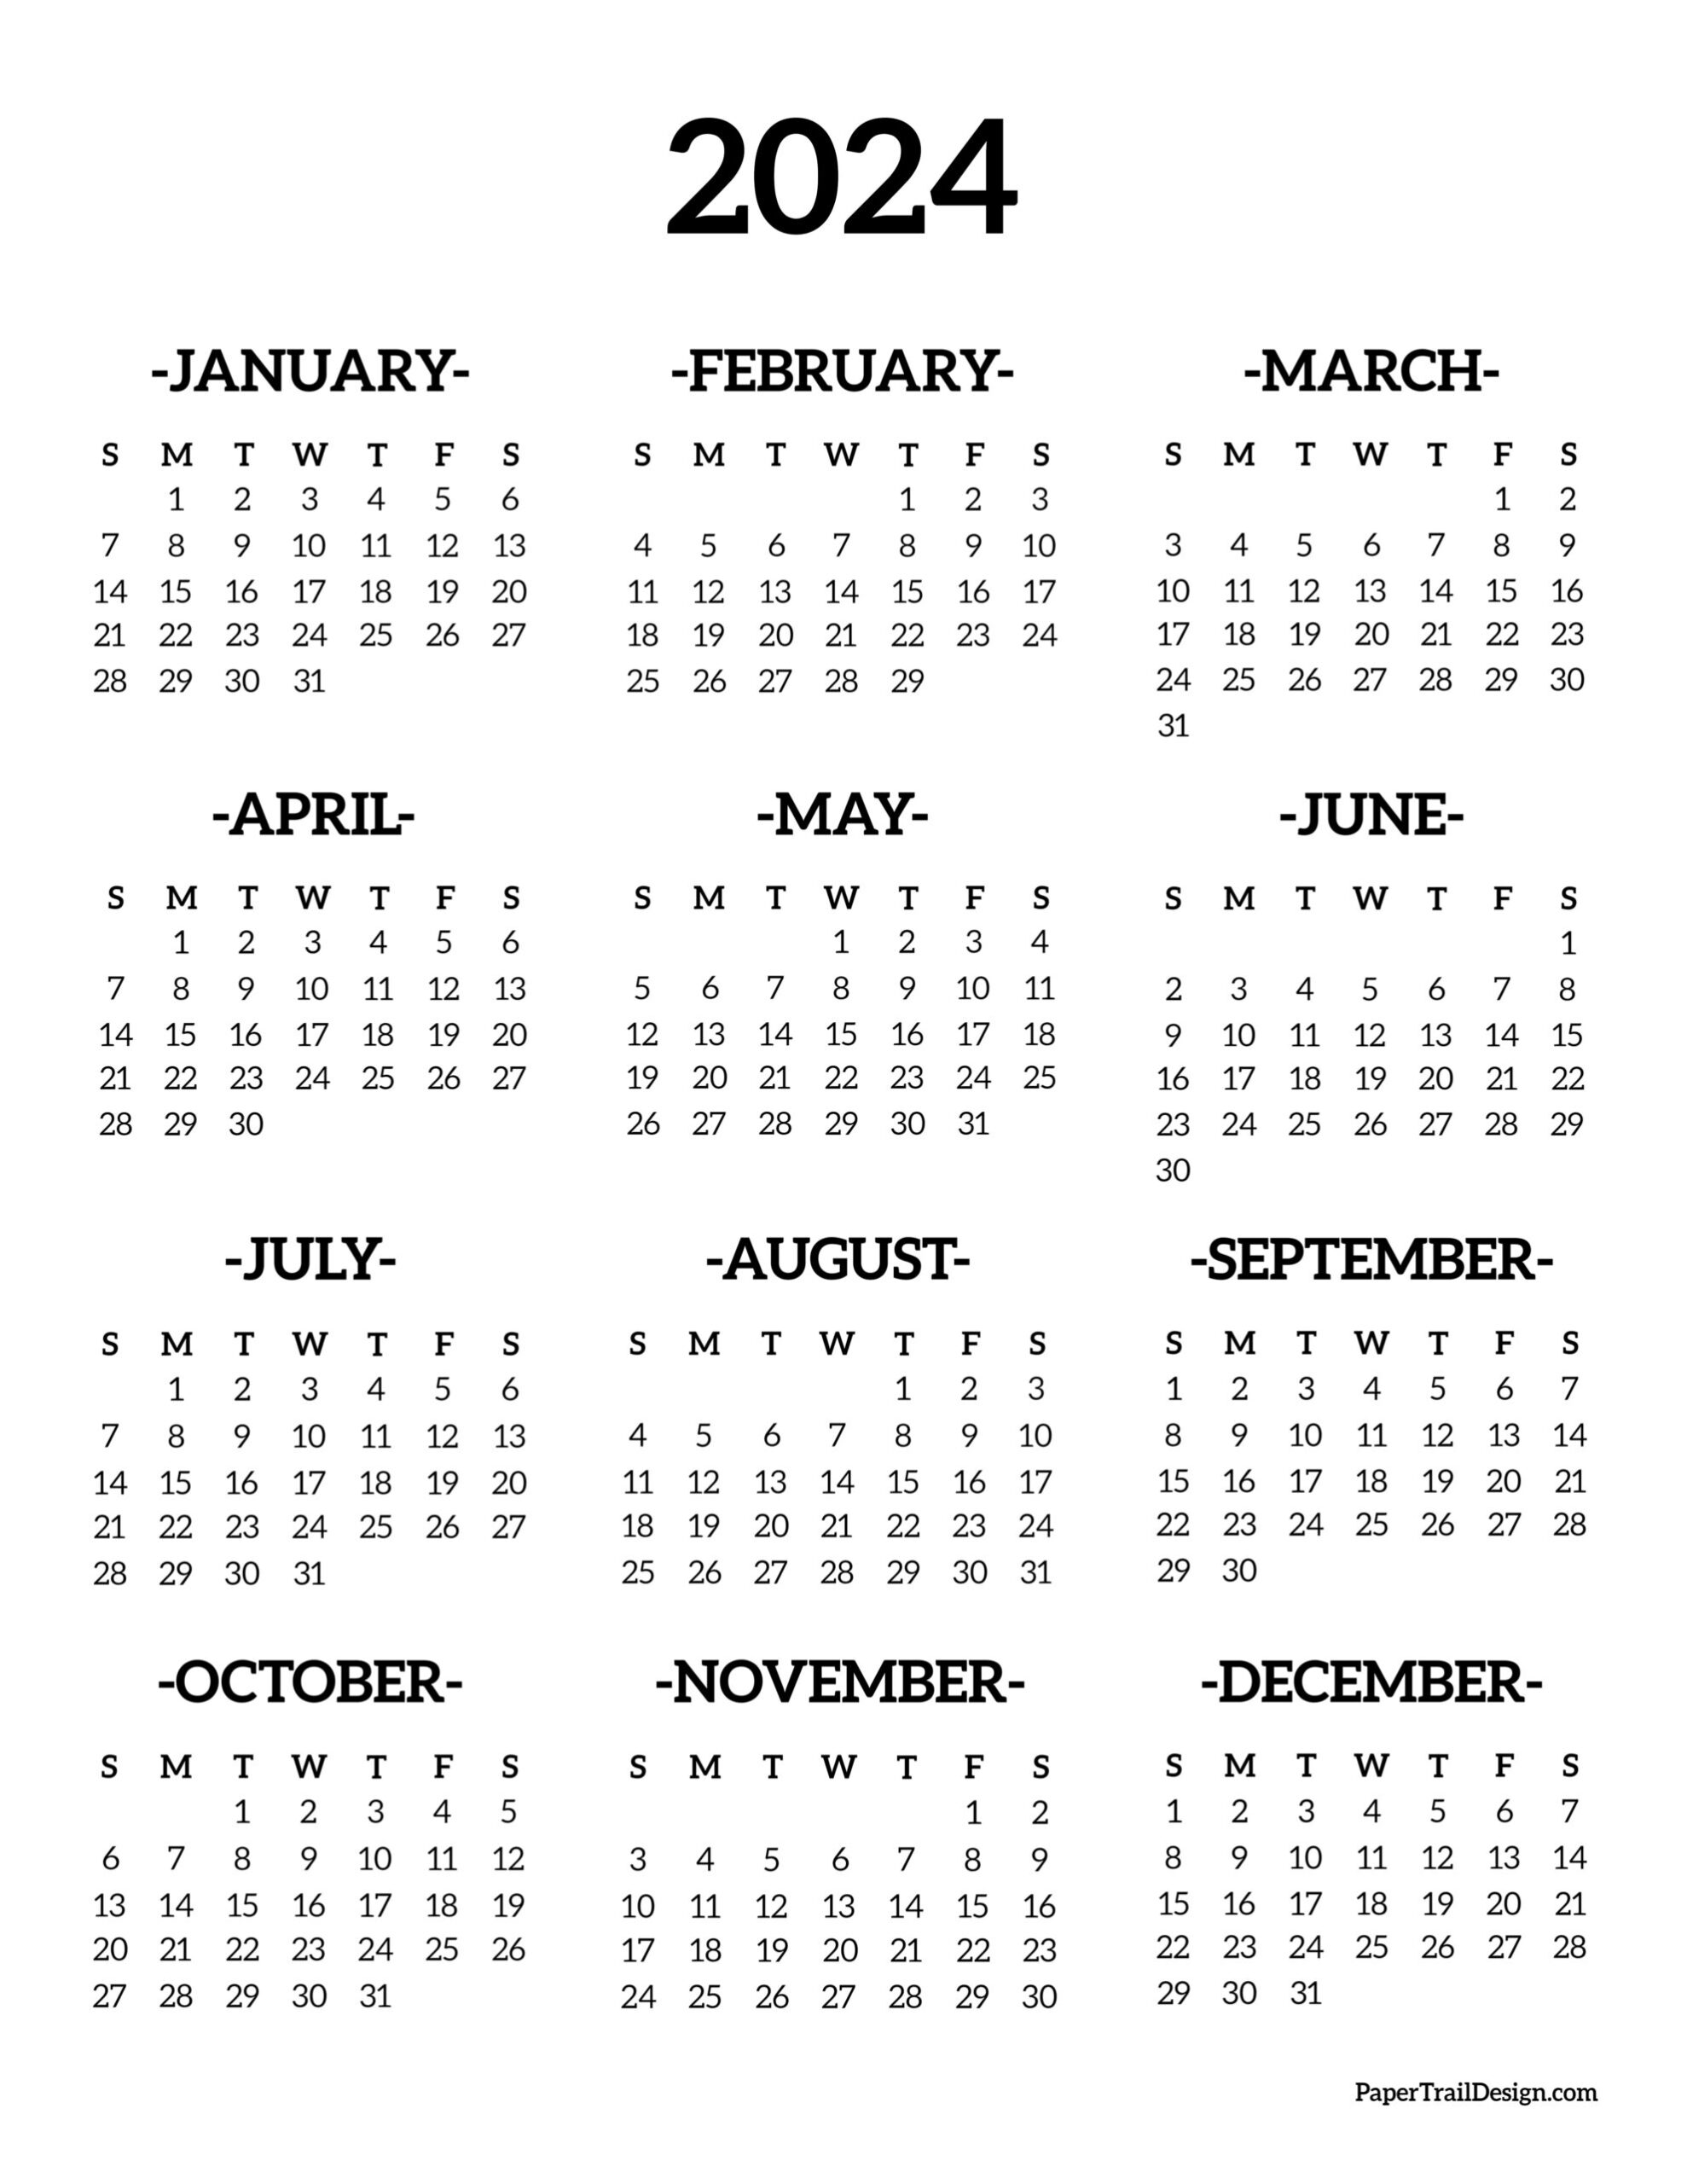 Calendar 2024 Printable One Page - Paper Trail Design for 2024 Year Calendar Printable